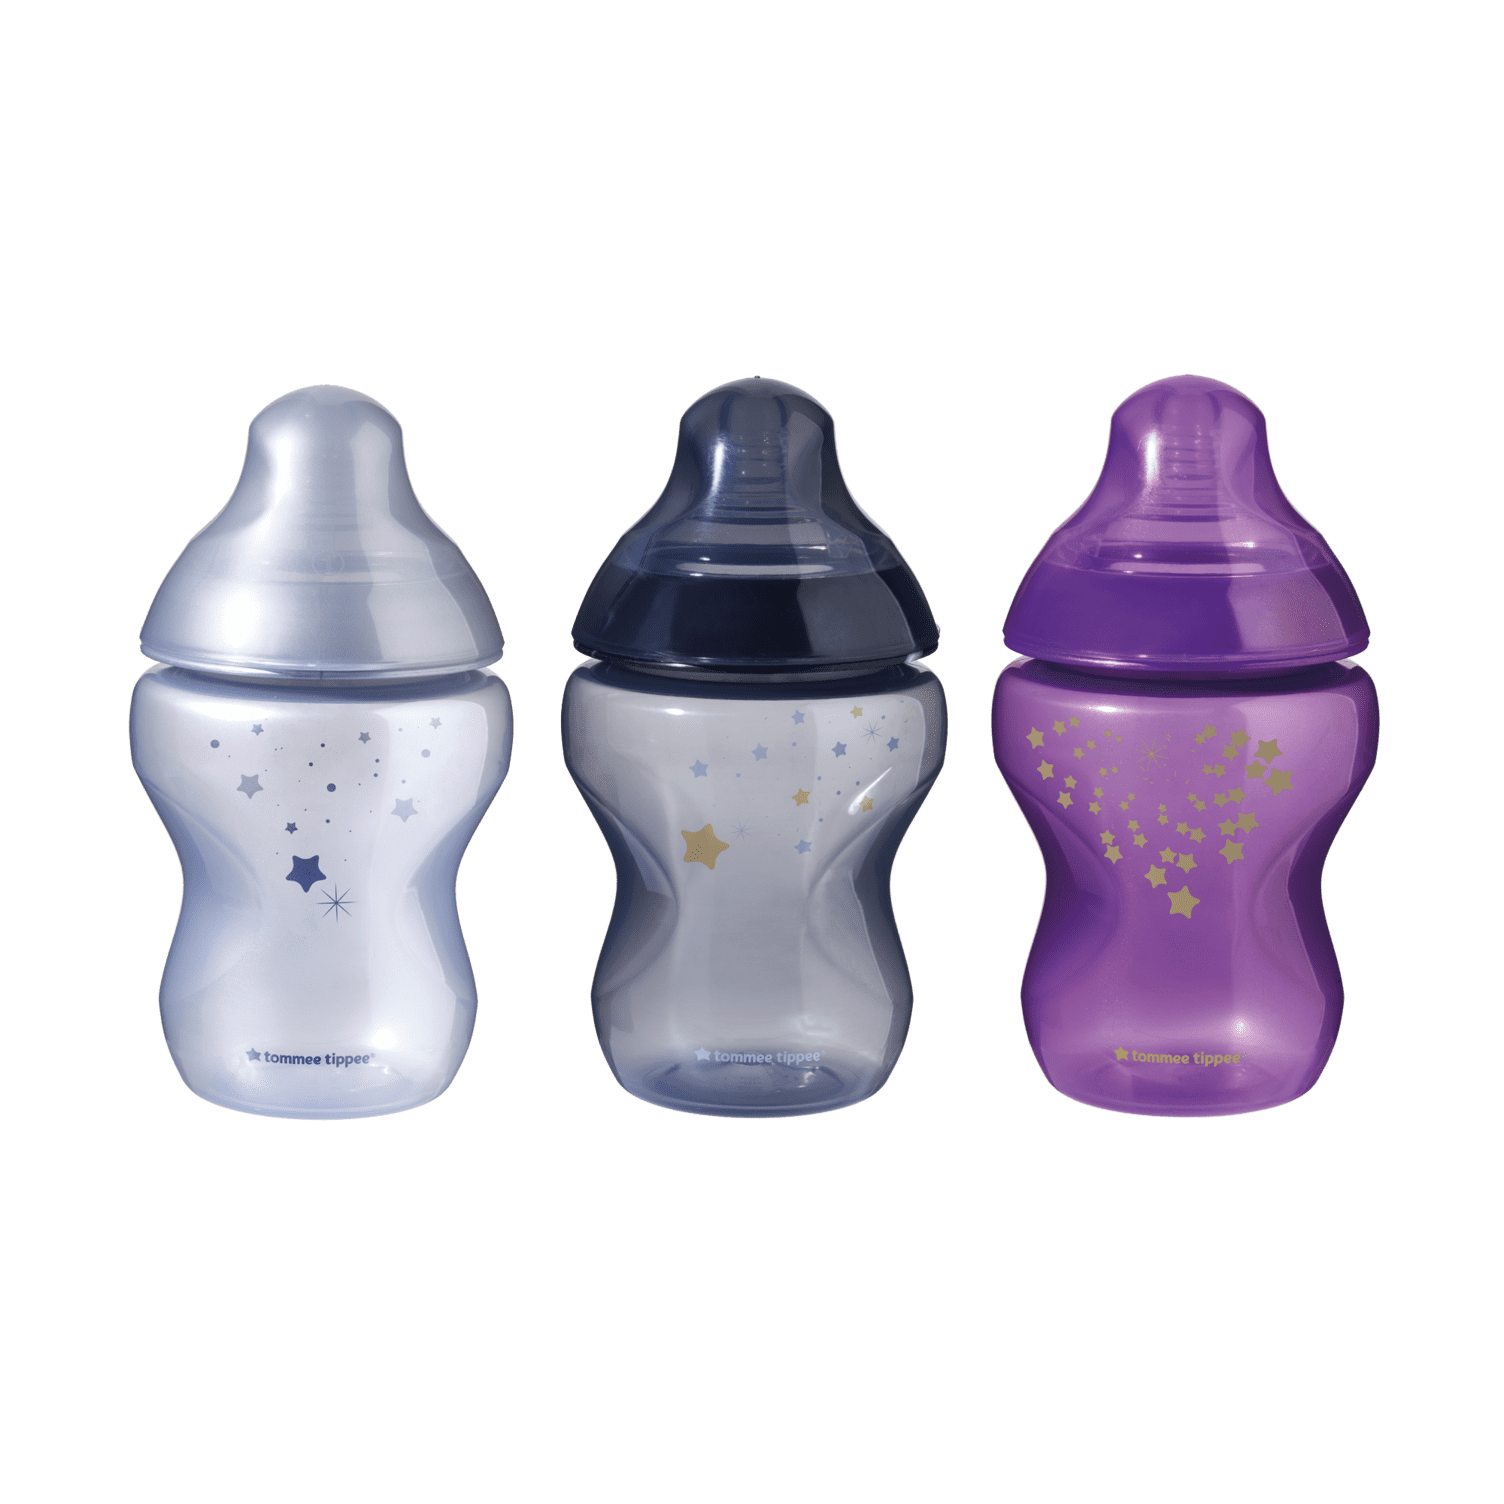 Tommee Tippee Closer to Nature Baby Bottles - Xclusivebrandsbd